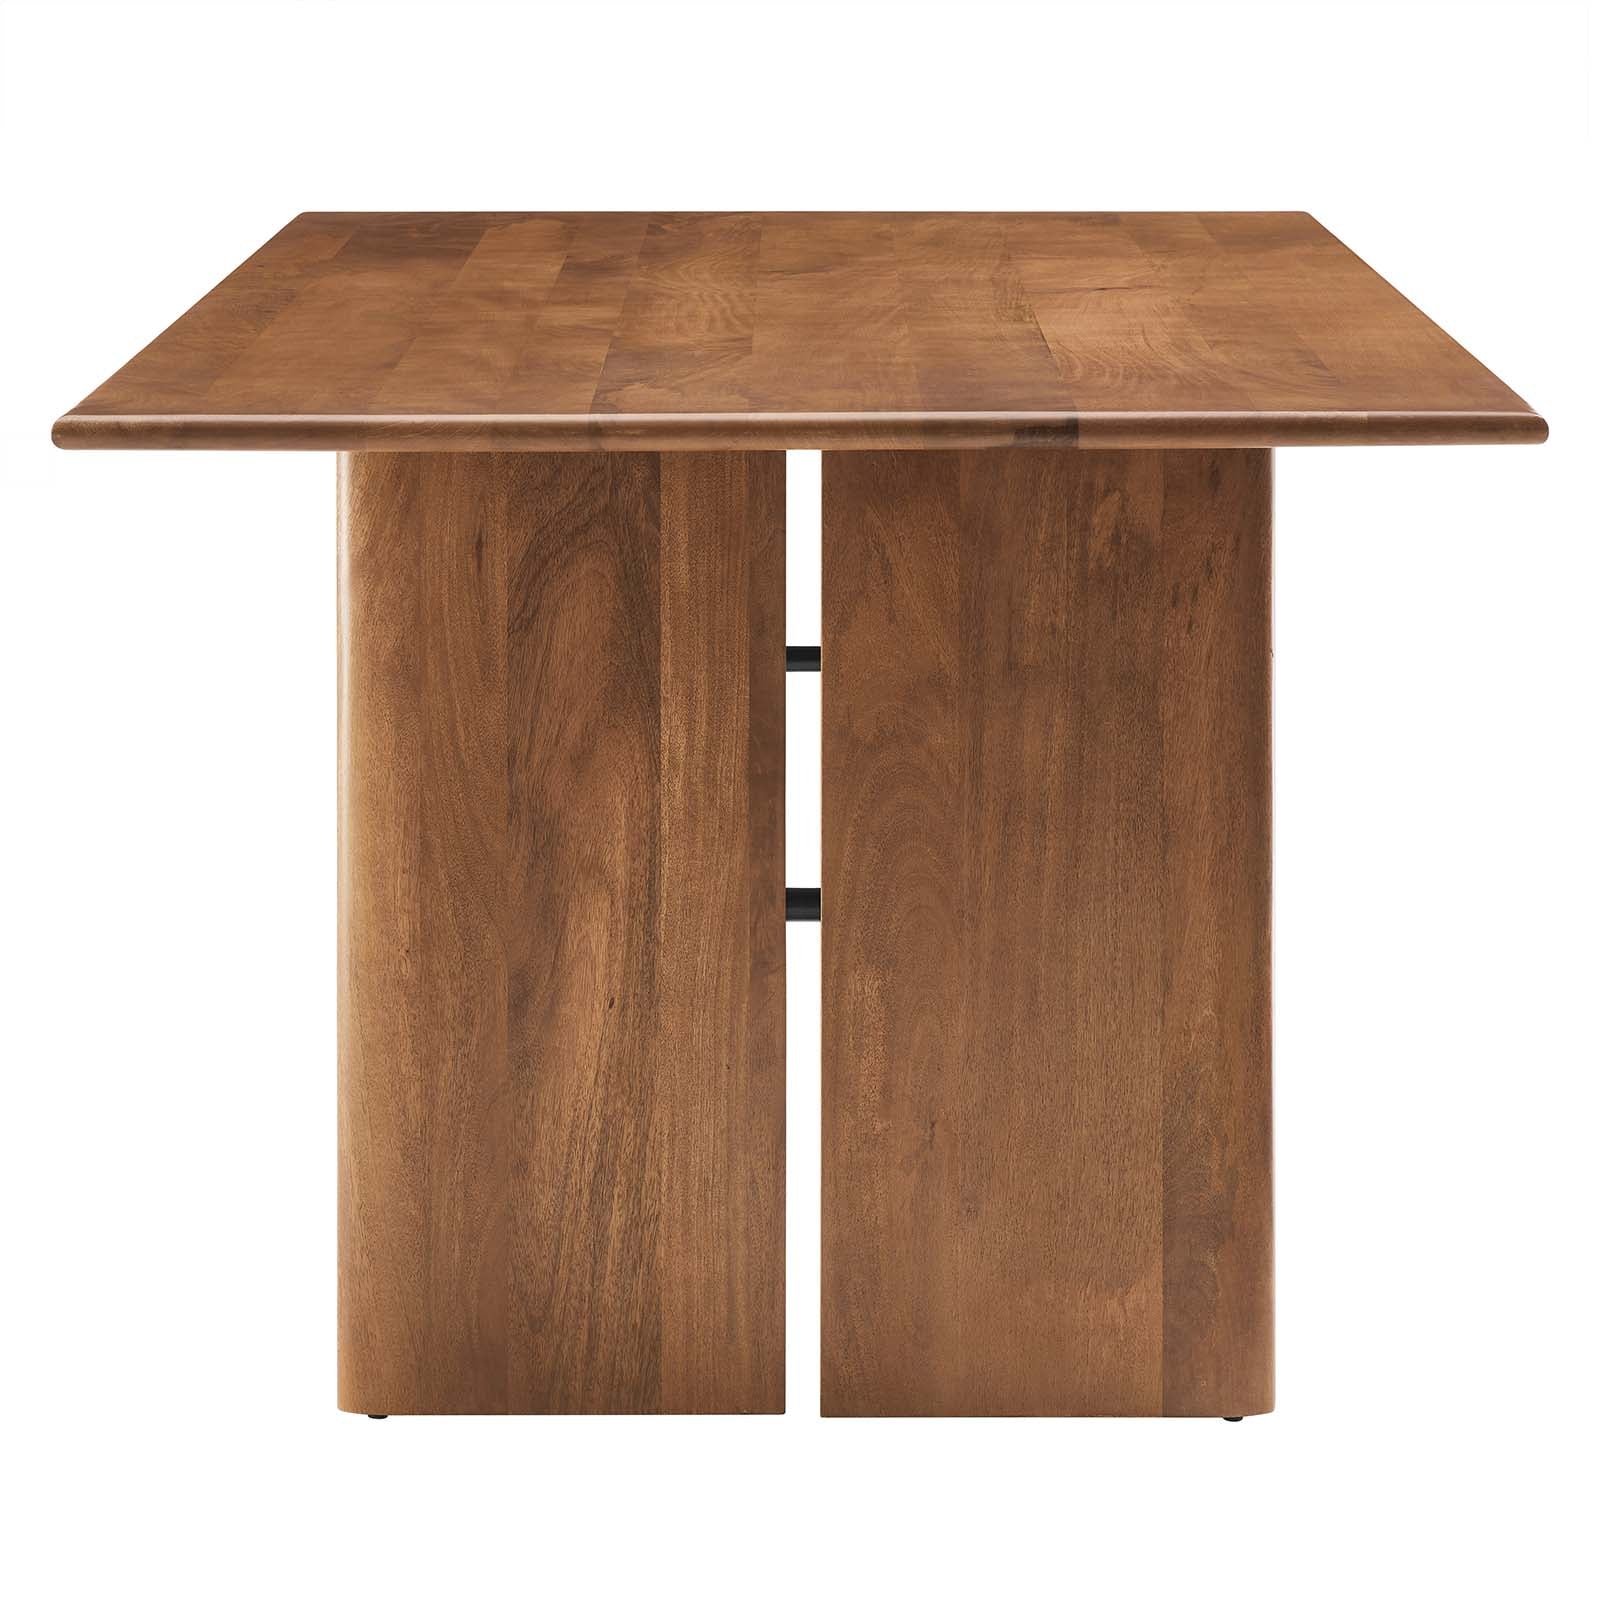 Amistad 86" Wood Dining Table - East Shore Modern Home Furnishings